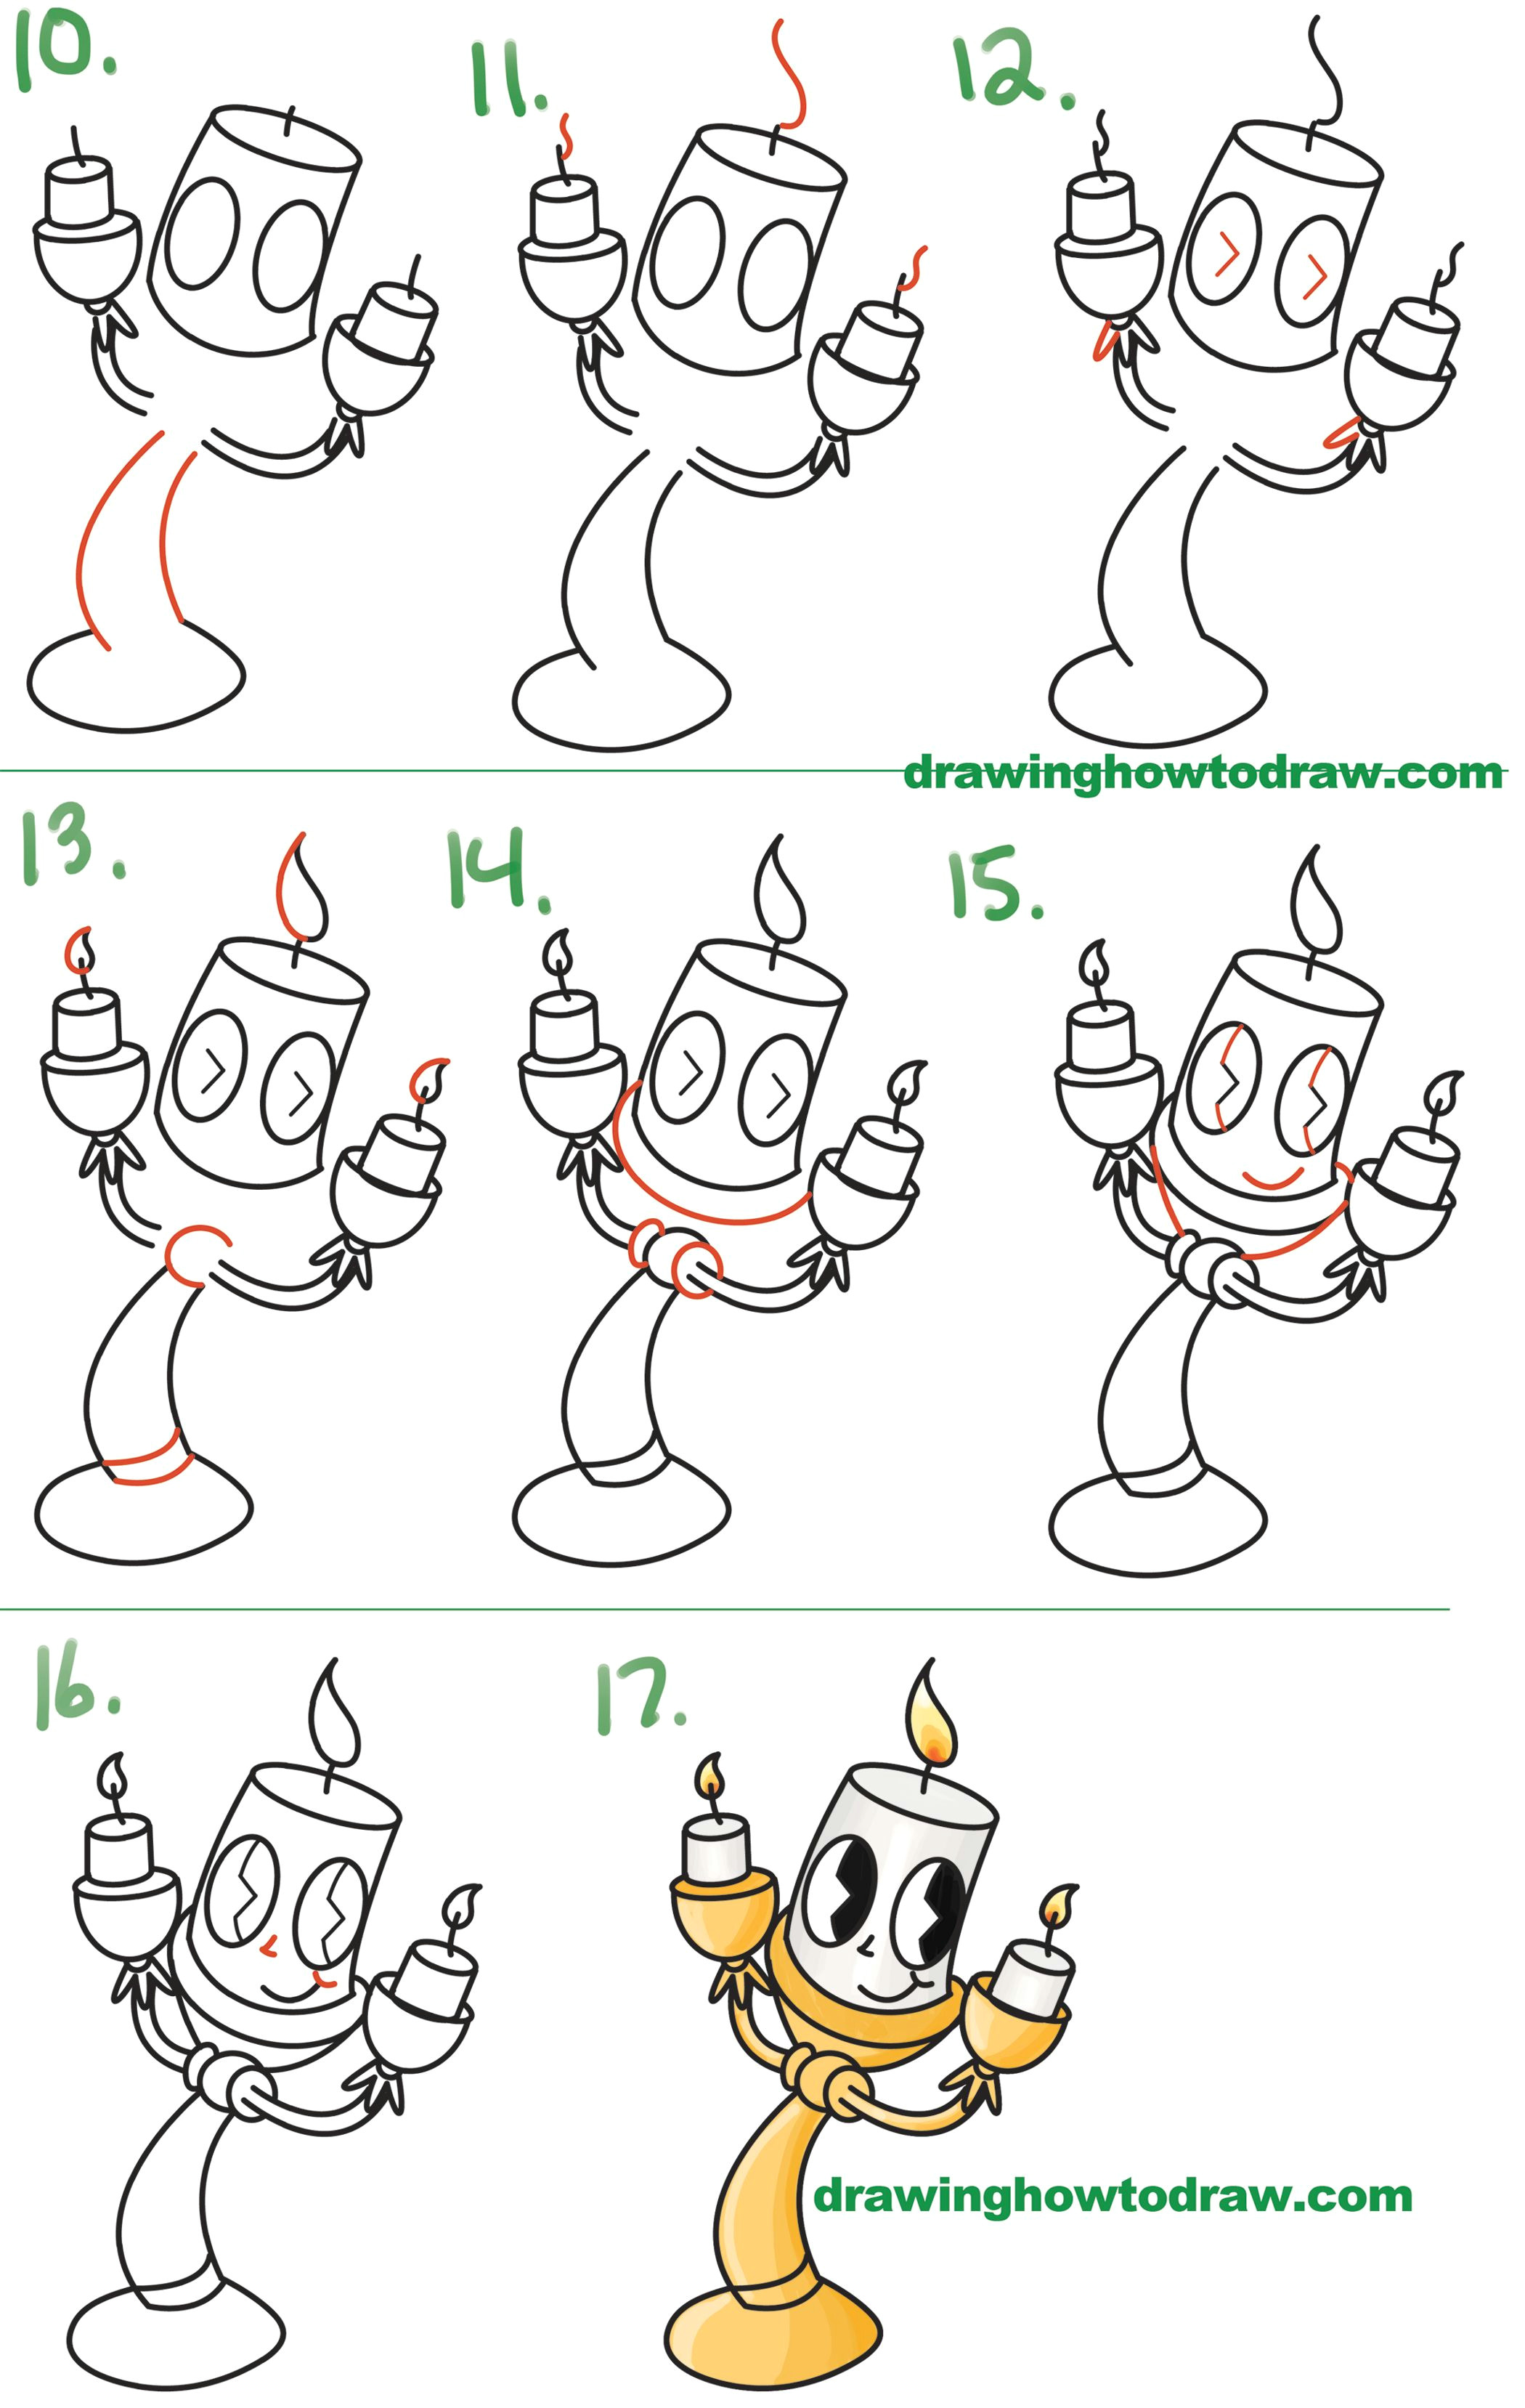 Easy Drawings Mulan How to Draw Lumiere Cute Kawaii Chibi From Beauty and the Beast